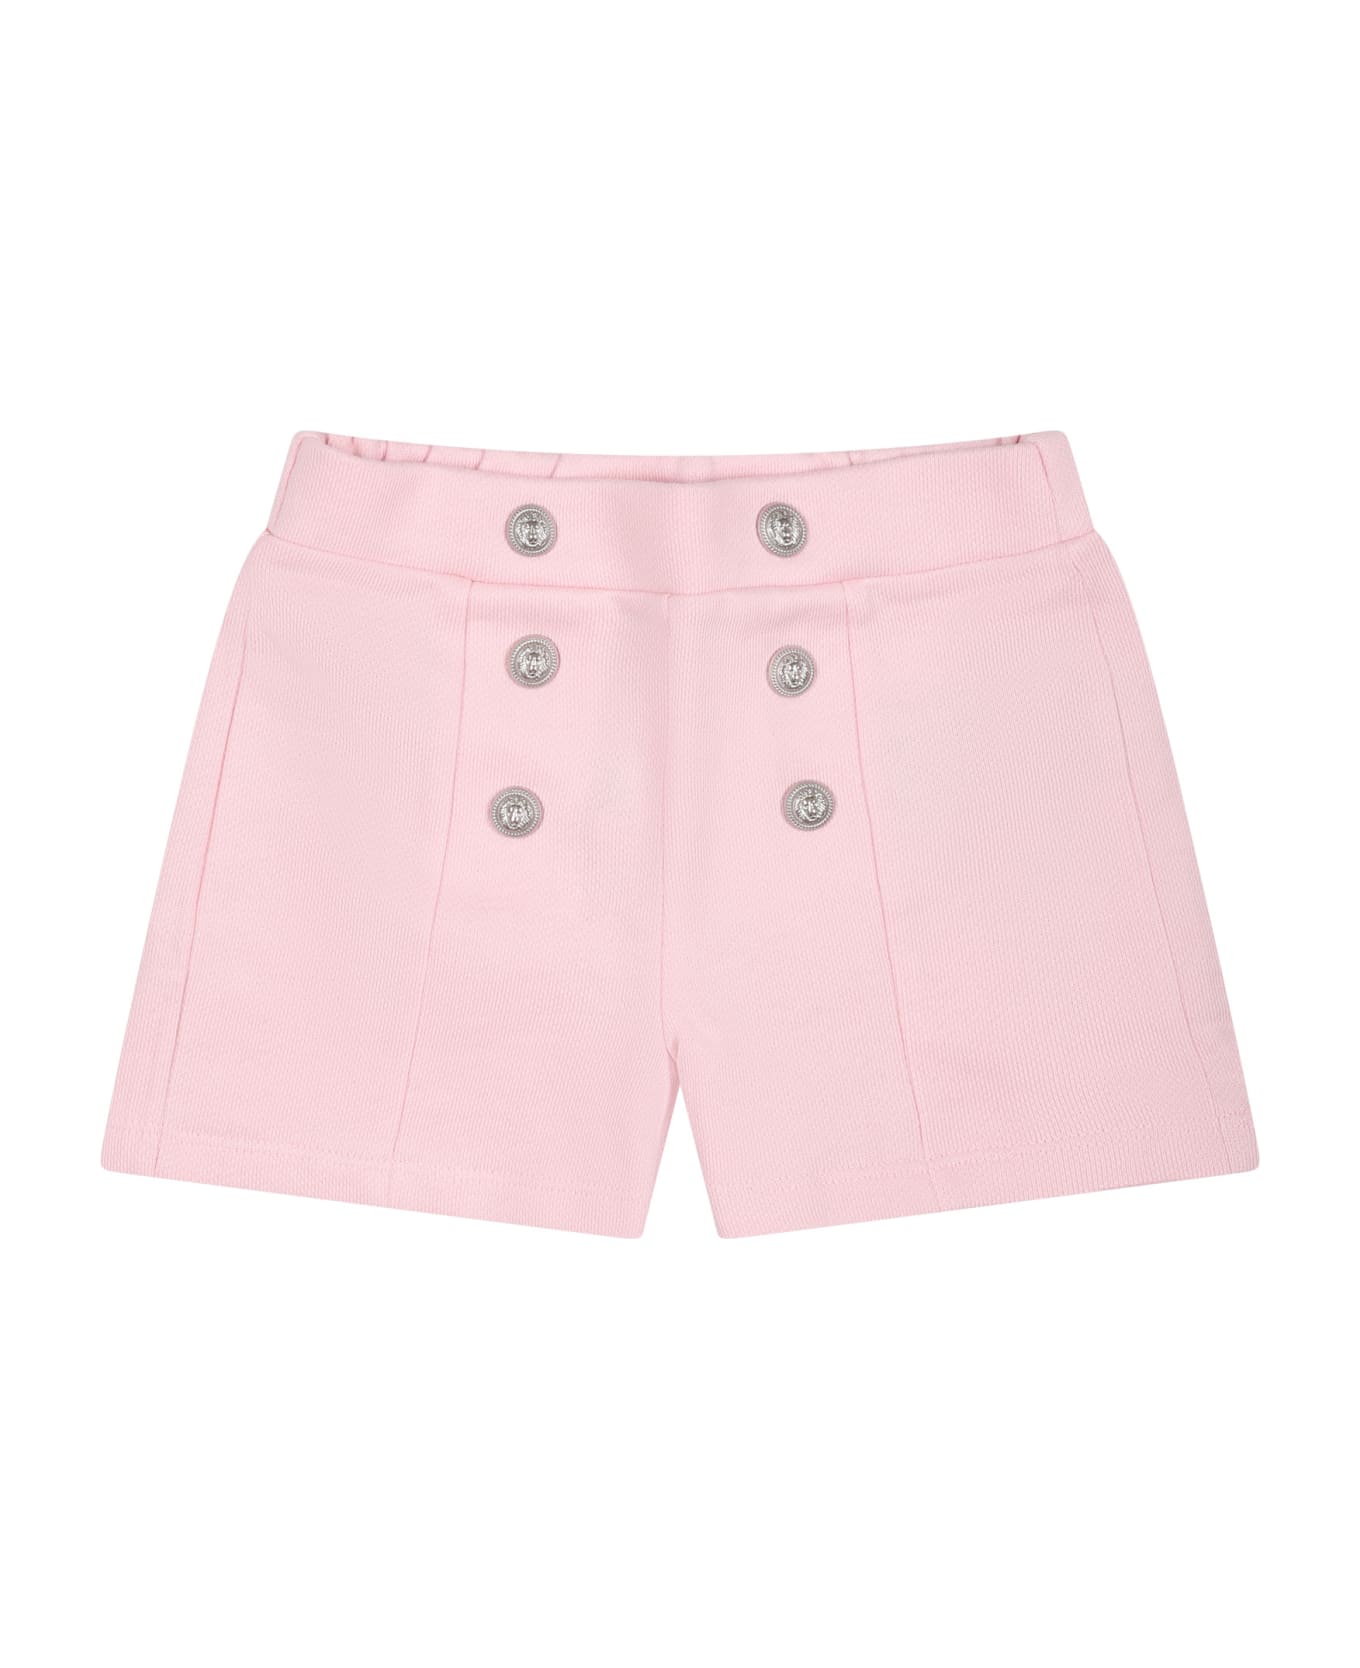 Balmain Pink Shorts For Baby Girl With Silver Buttons - Pink ボトムス